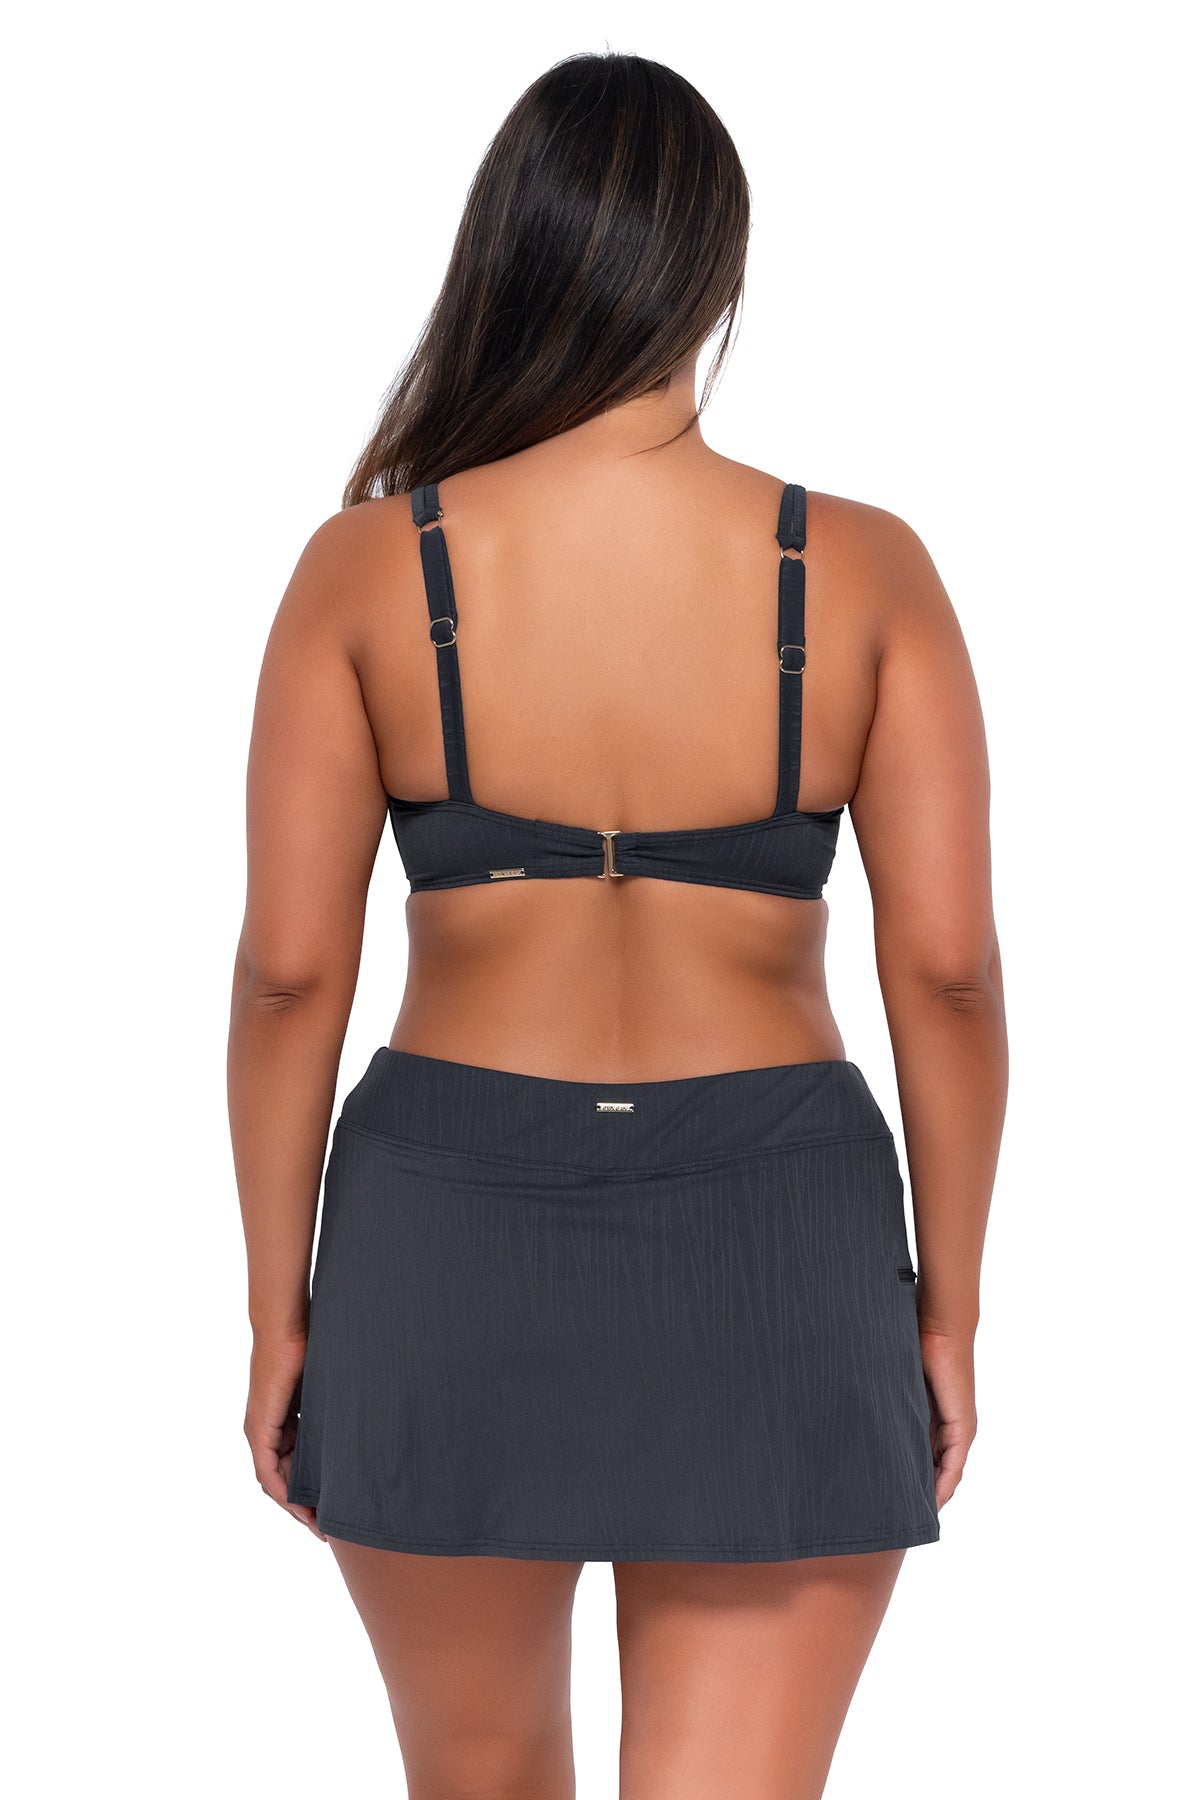 Back pose #1 of Nicky wearing Sunsets Slate Seagrass Texture Sporty Swim Skirt with matching Taylor Bralette bikini top